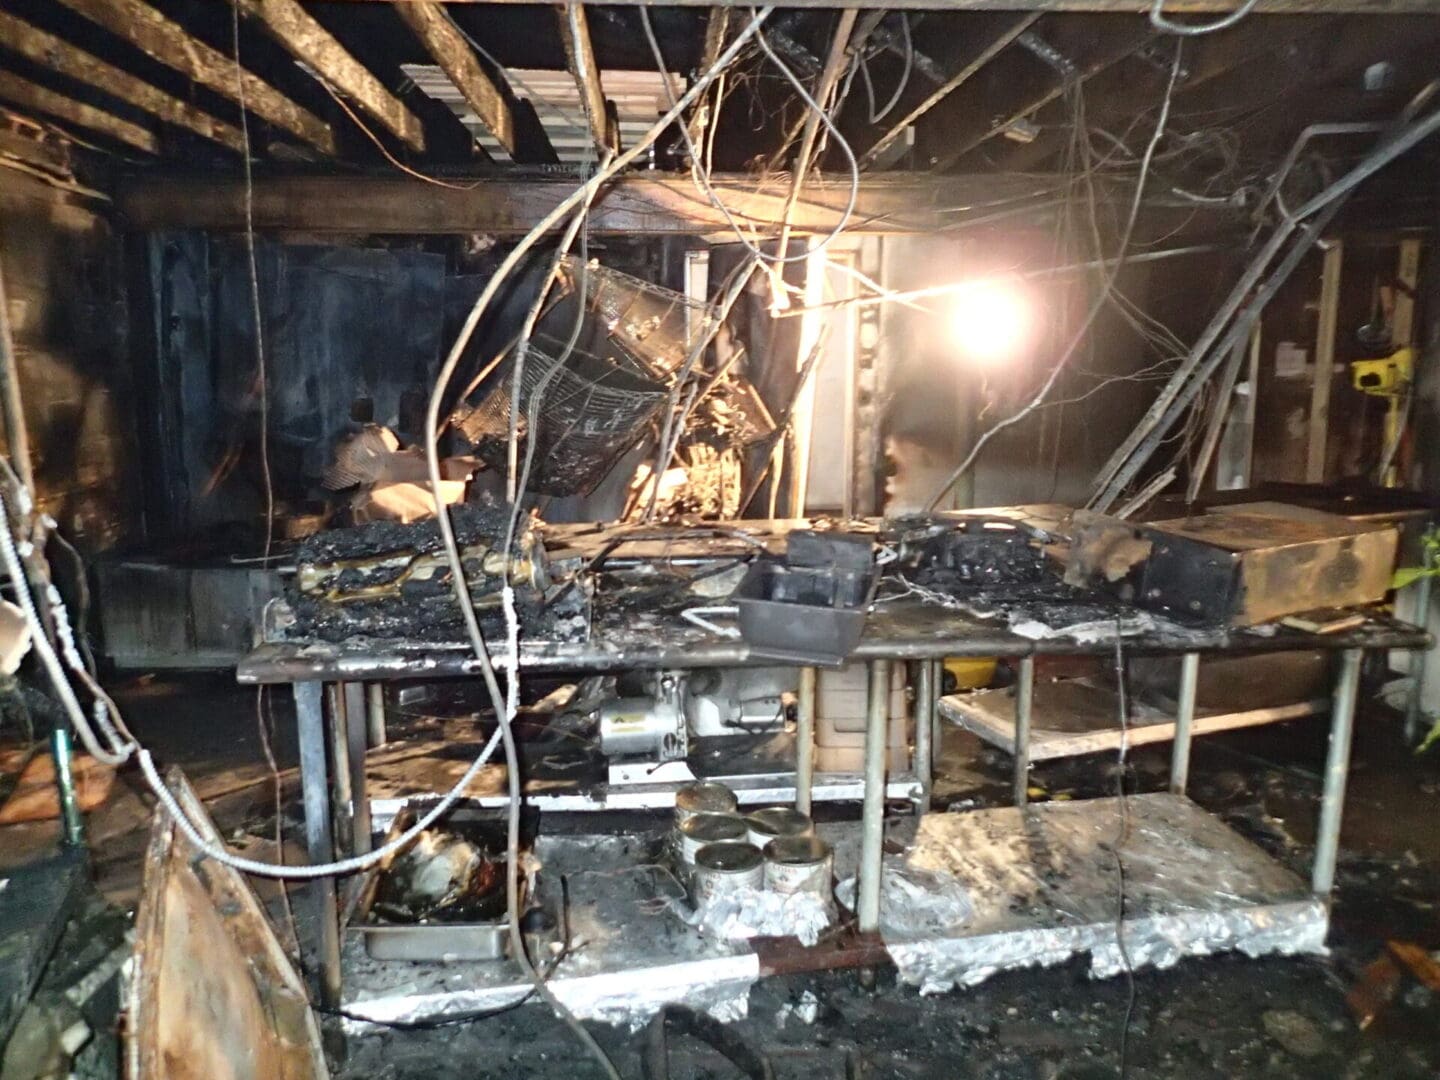 A fire damaged building with wires hanging from the ceiling.